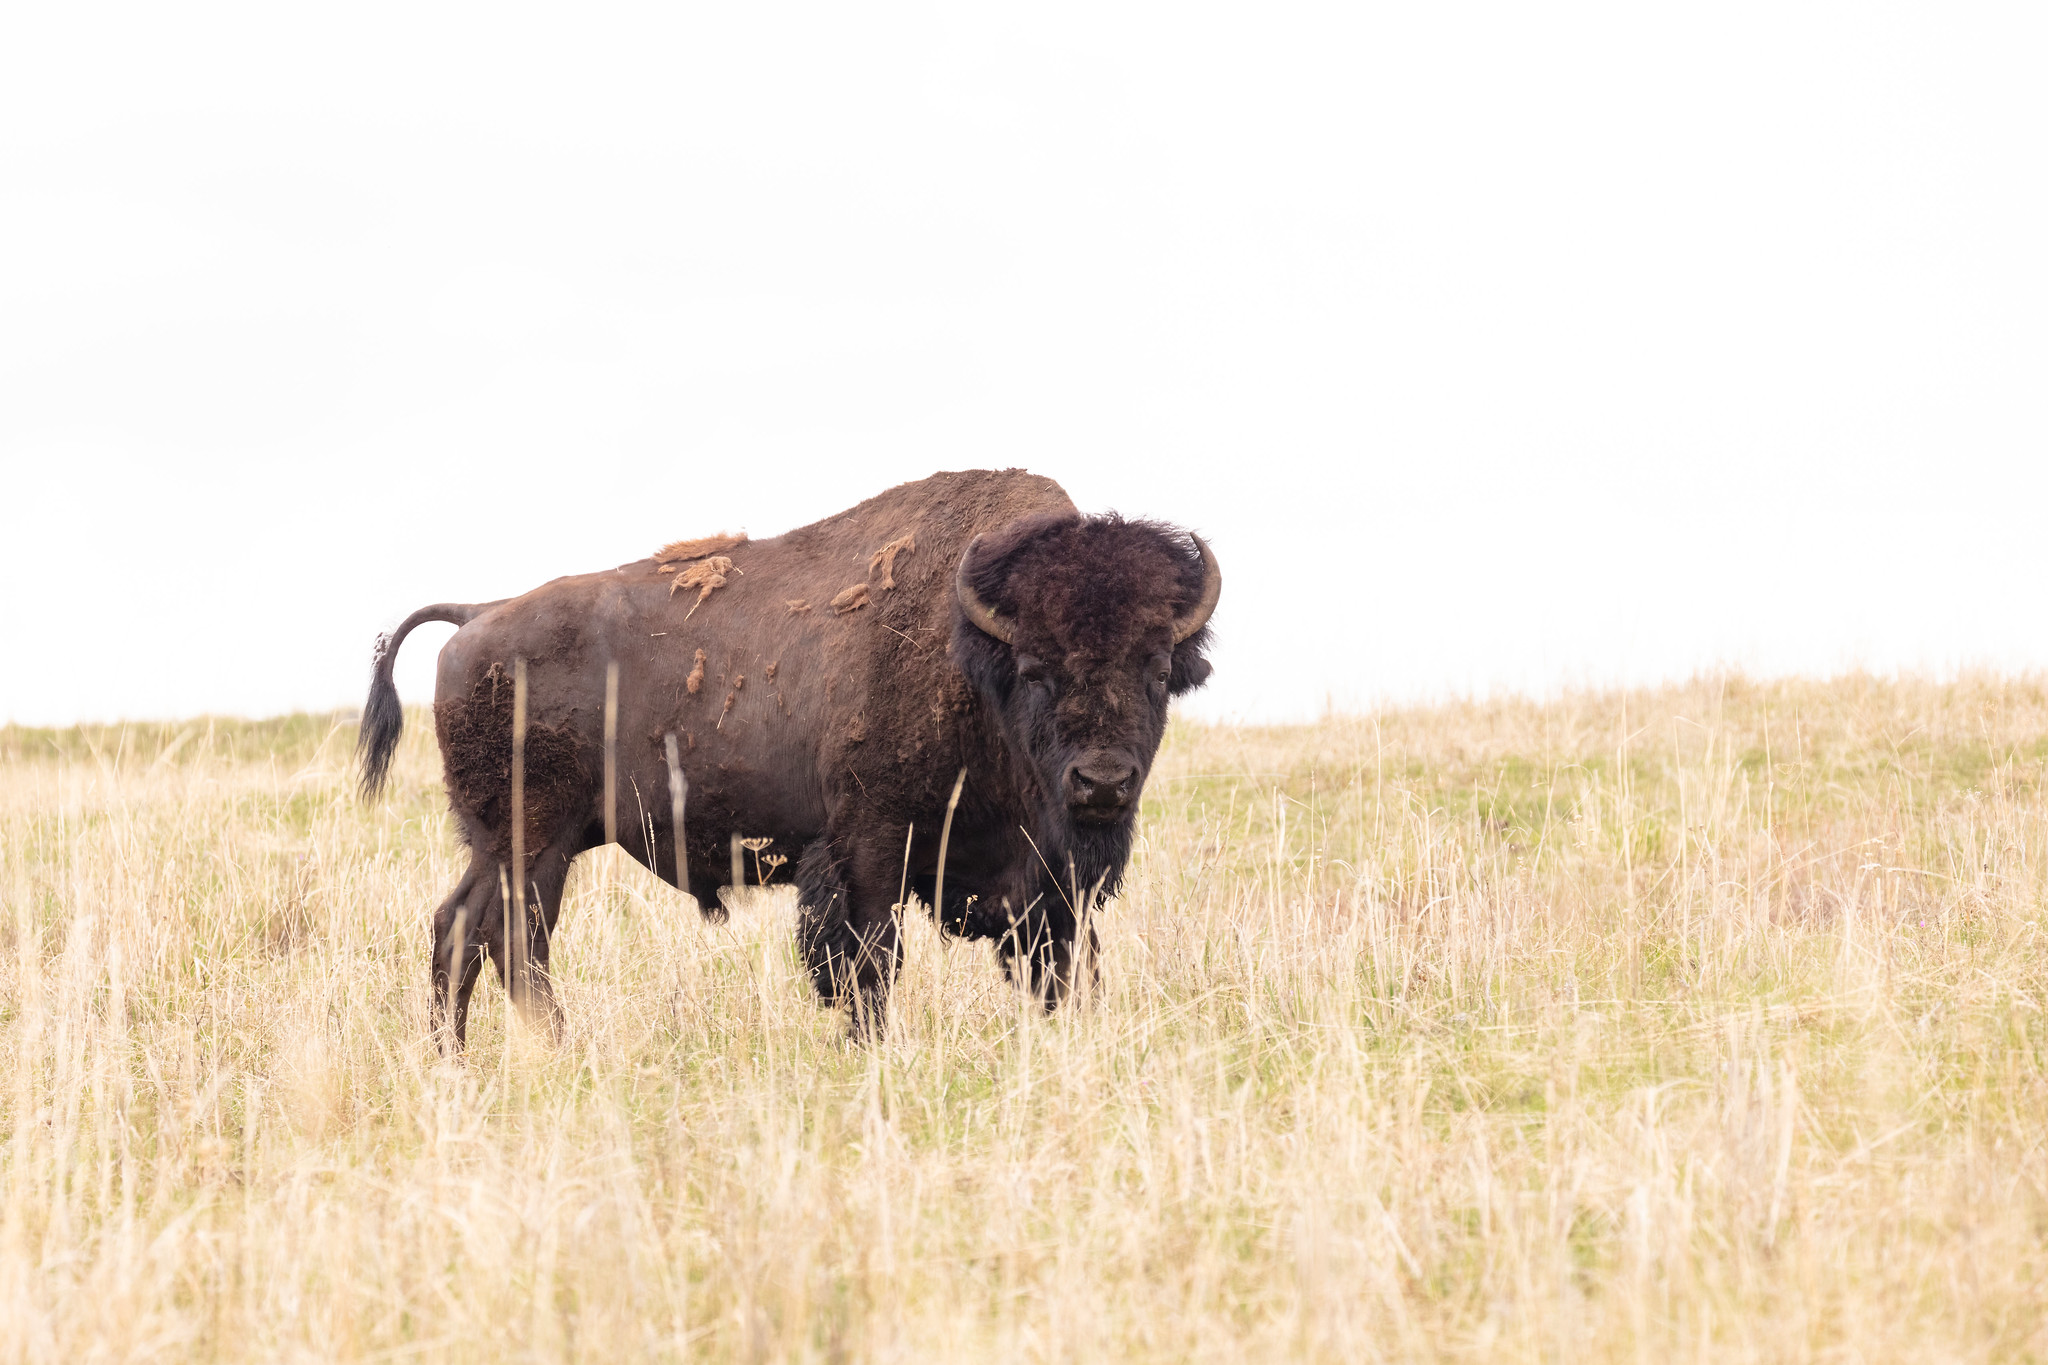 83-Year-Old Woman Gored by Bison in Yellowstone National Park: Third Incident in a Year